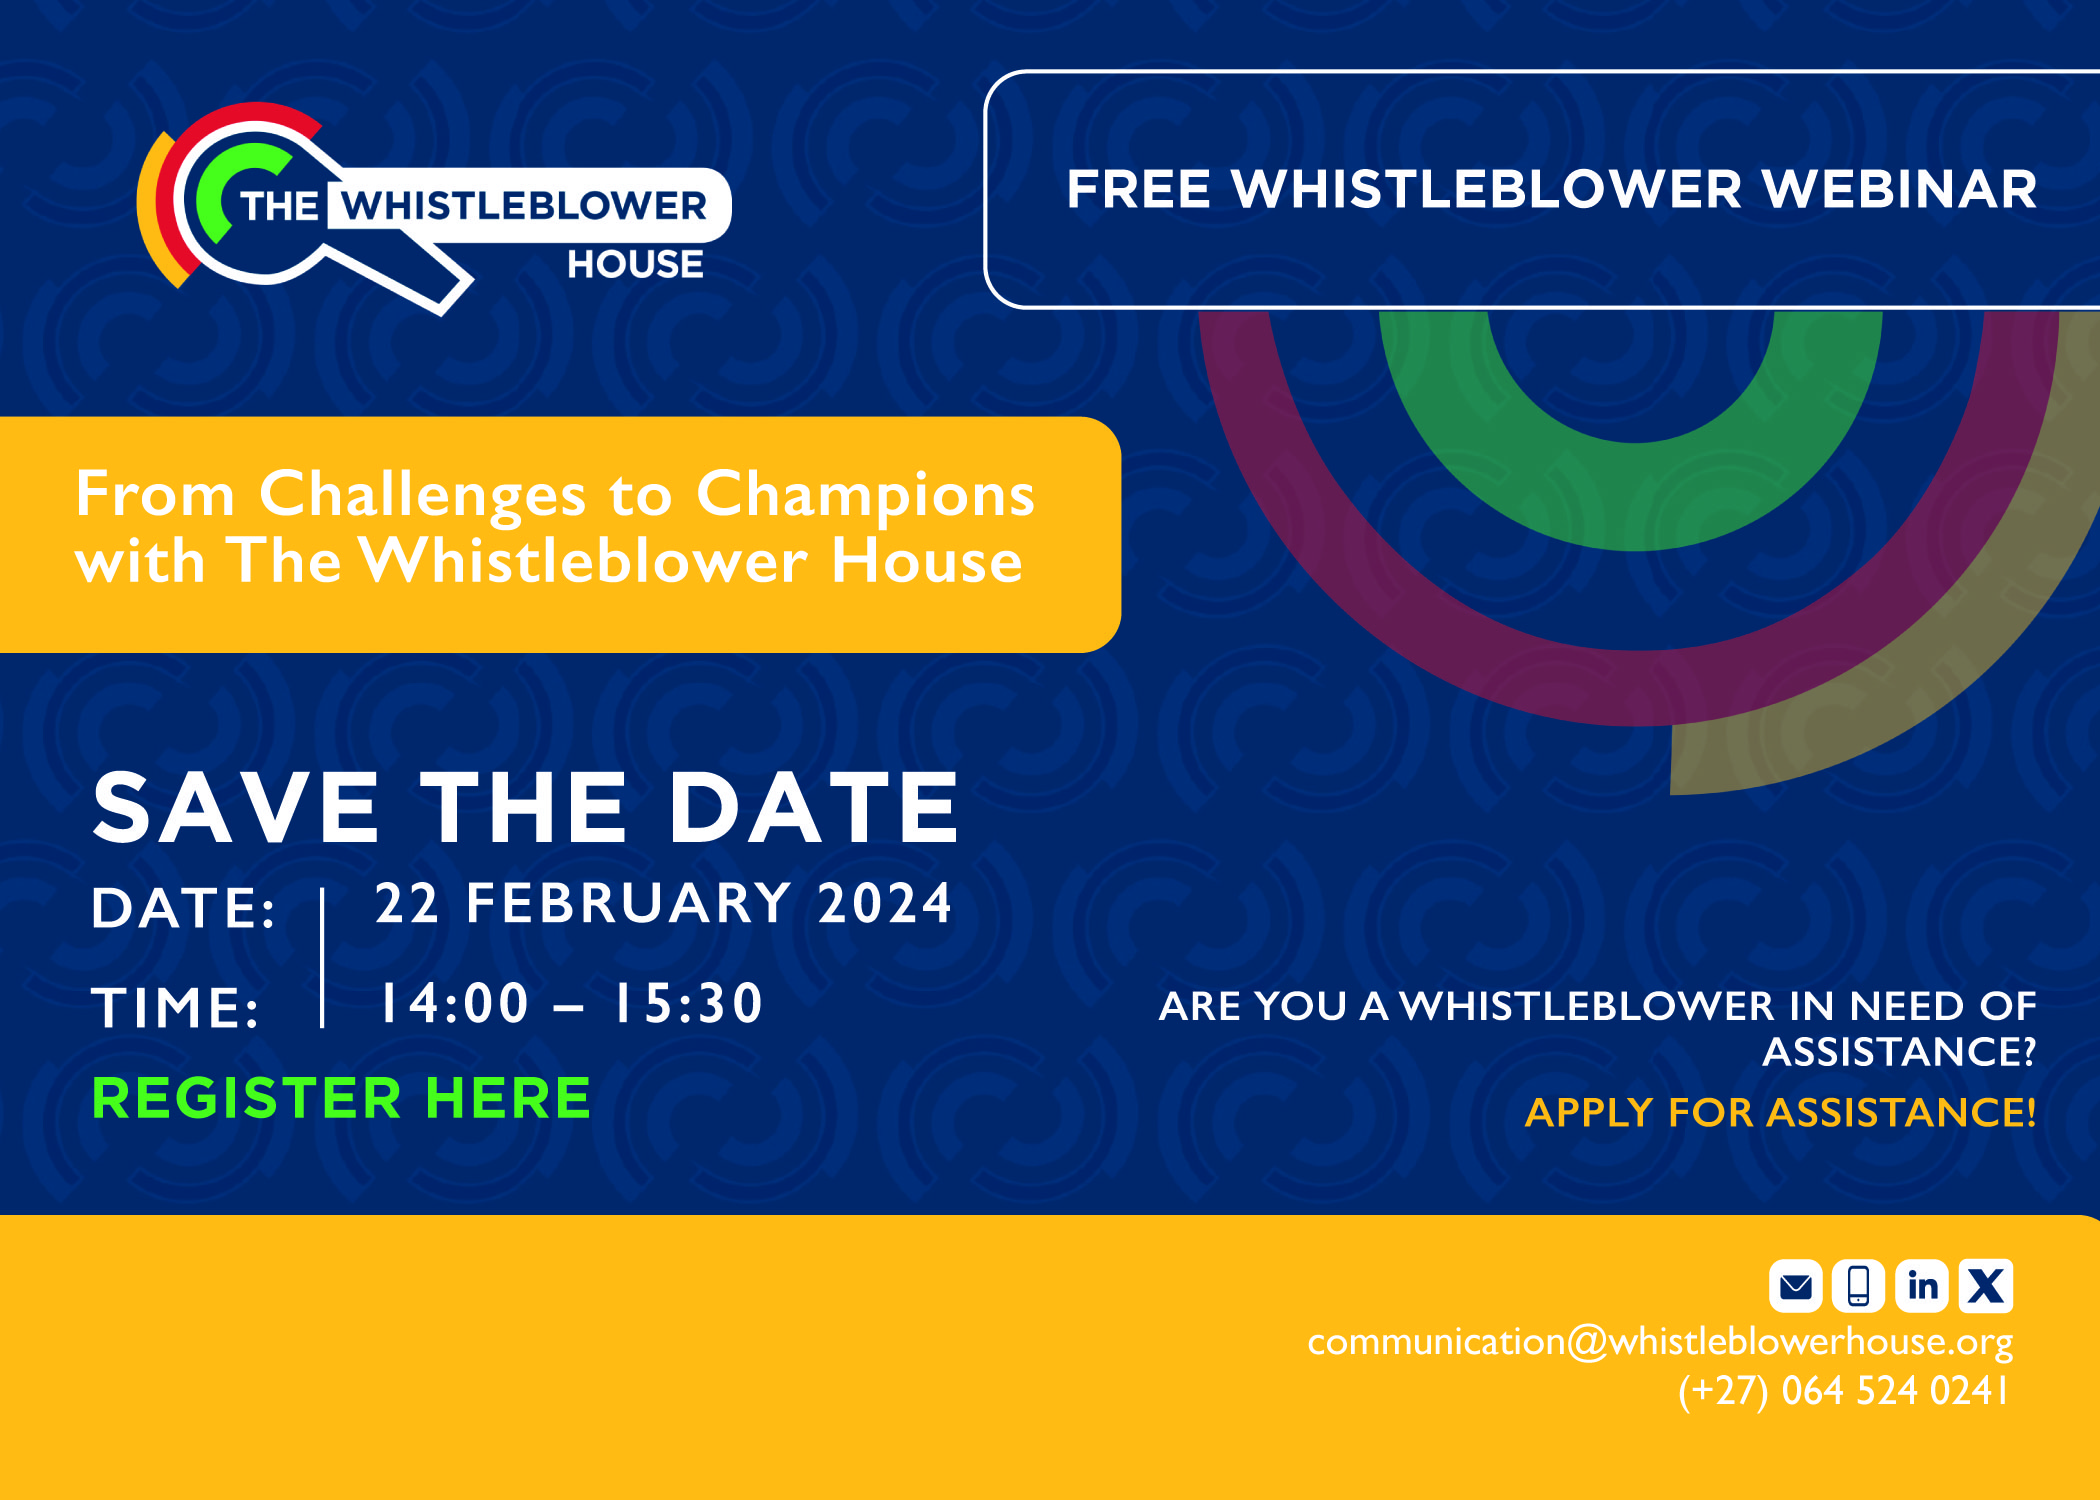 From Challenges to Champions with The Whistleblowers House